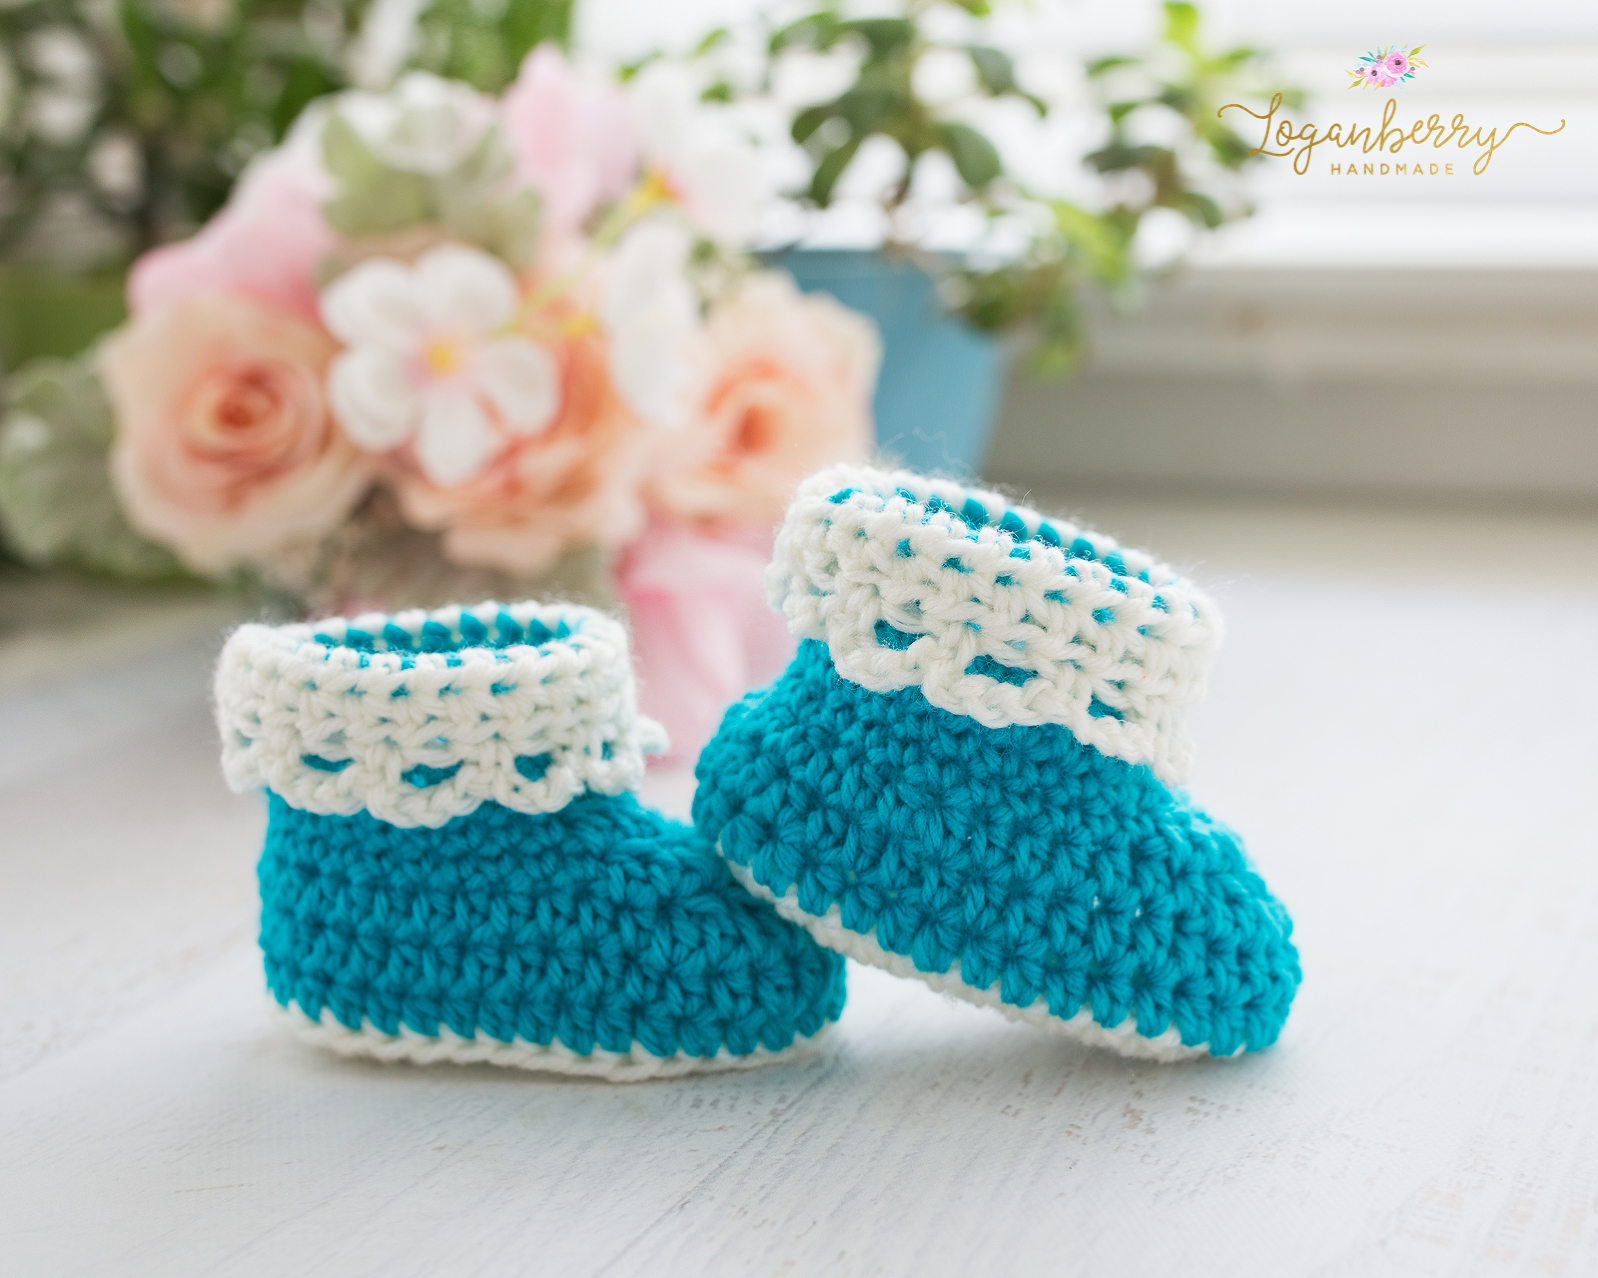 Handmade Crochet Baby Booties with Ribbon Lace and Button 